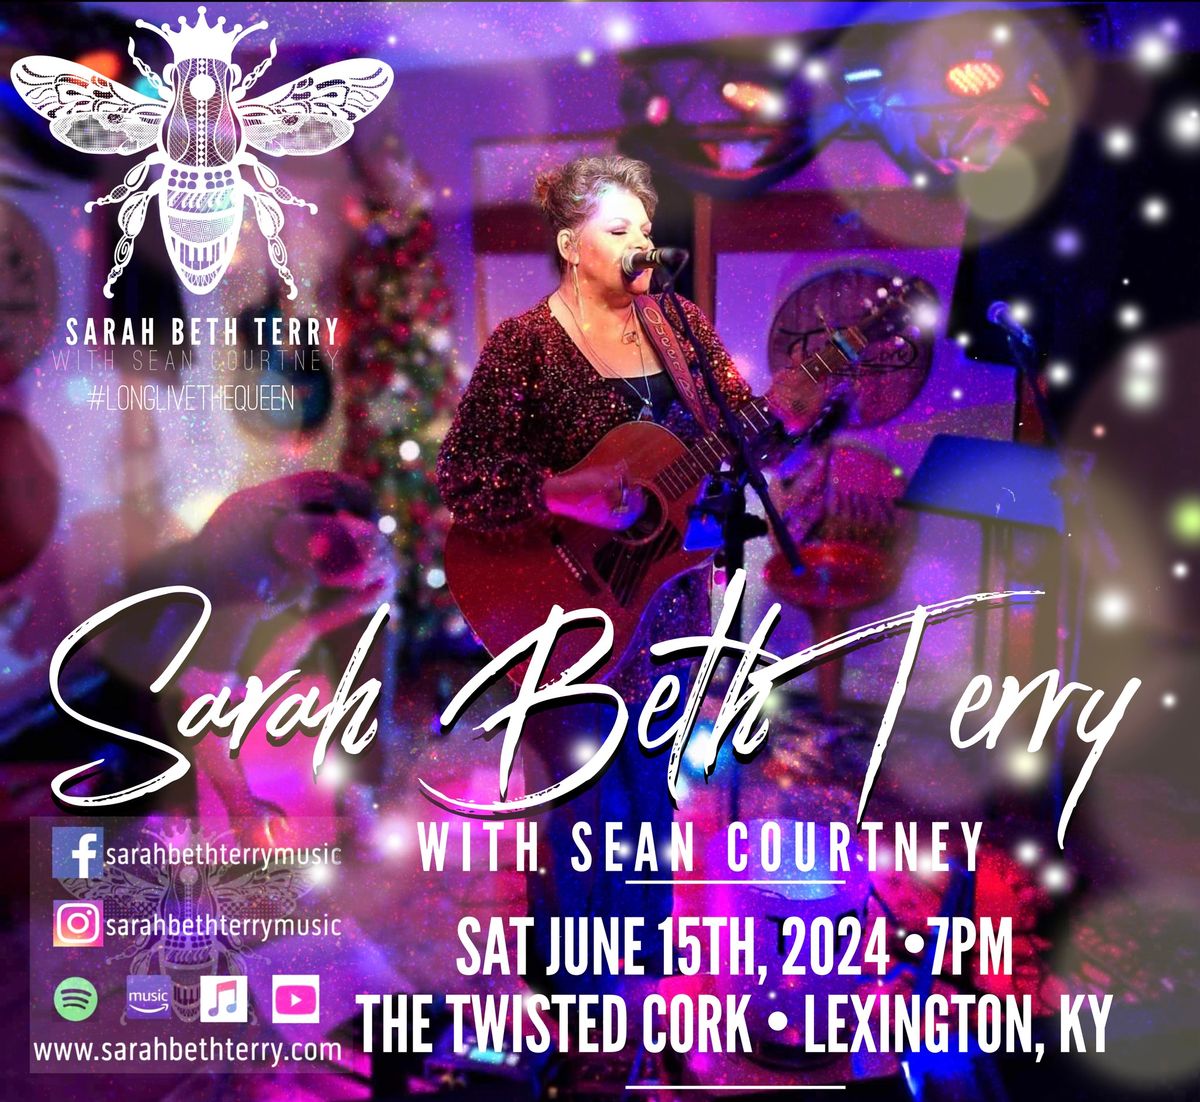 Sarah Beth Terry LIVE with Sean Courtney at The Twisted Cork - Lexington, KY